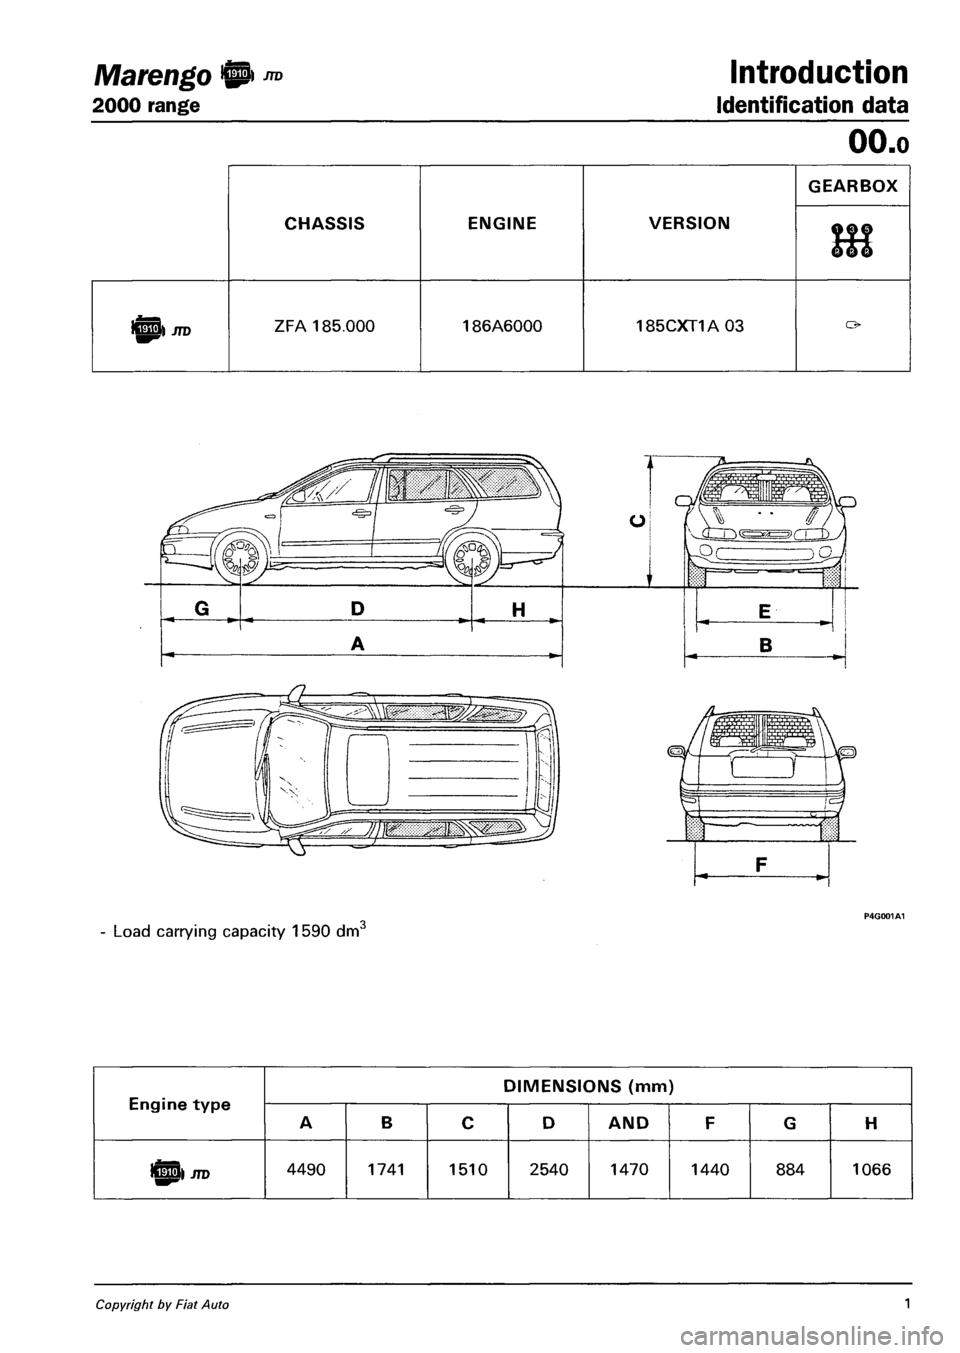 FIAT MAREA 2001 1.G Service Manual Marengo fl ™ Introduction 
2000 range Identification data 
OO.o 
CHASSIS ENGINE VERSION 
GEARBOX 
666 
ICSS) JTD ZFA 185.000 186A6000 185CXT1A 03 o 
Engine type 
DIMENSIONS (mm) 
Engine type 
A B C 